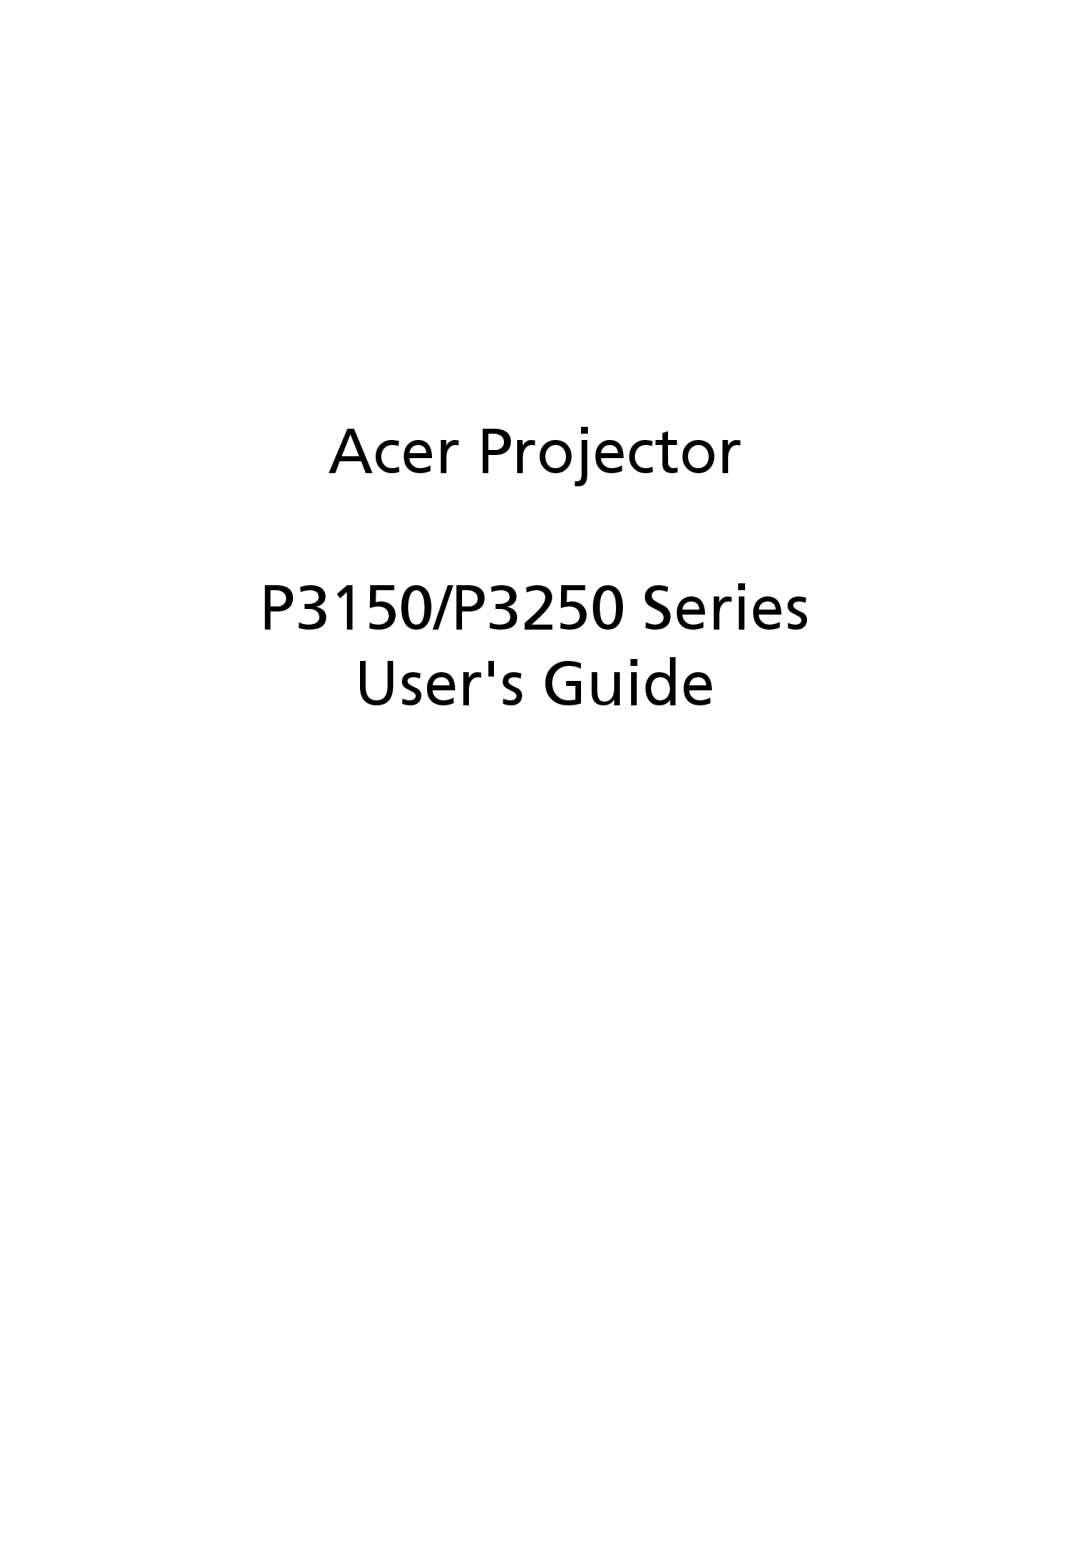 Acer P3150 Series manual Acer Projector P3150/P3250 Series Users Guide 